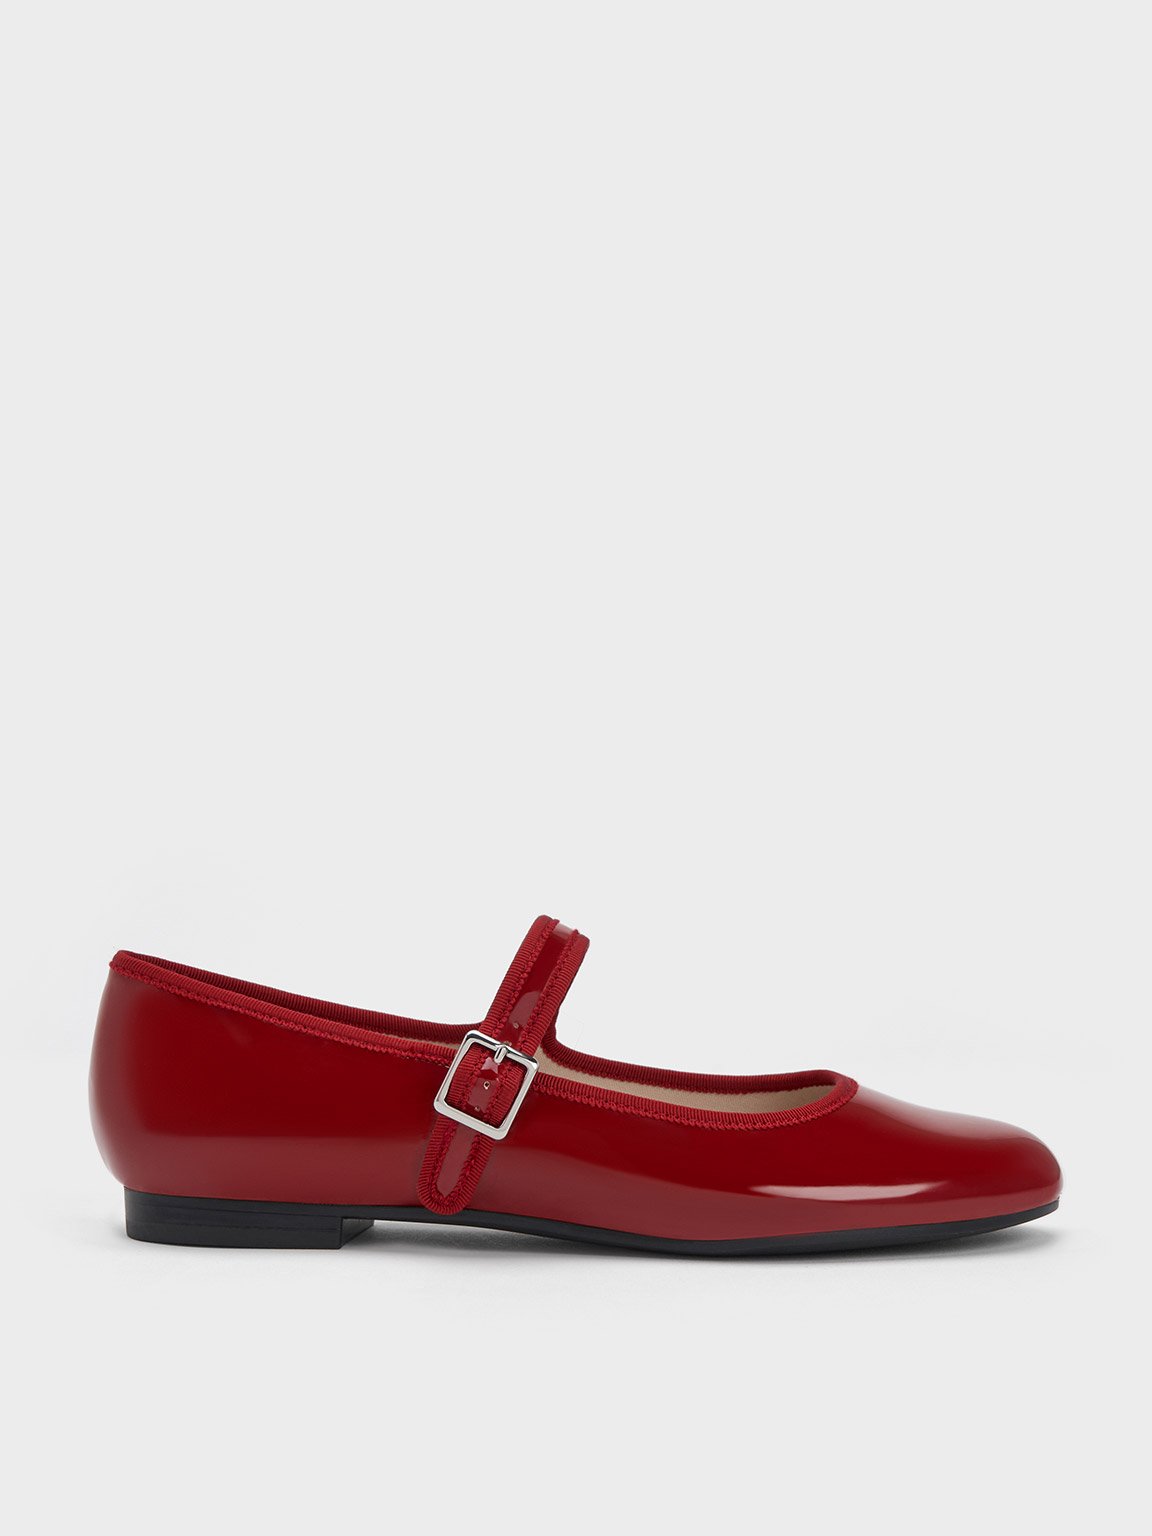 Red Patent Buckled Mary Jane Flats | CHARLES & KEITH